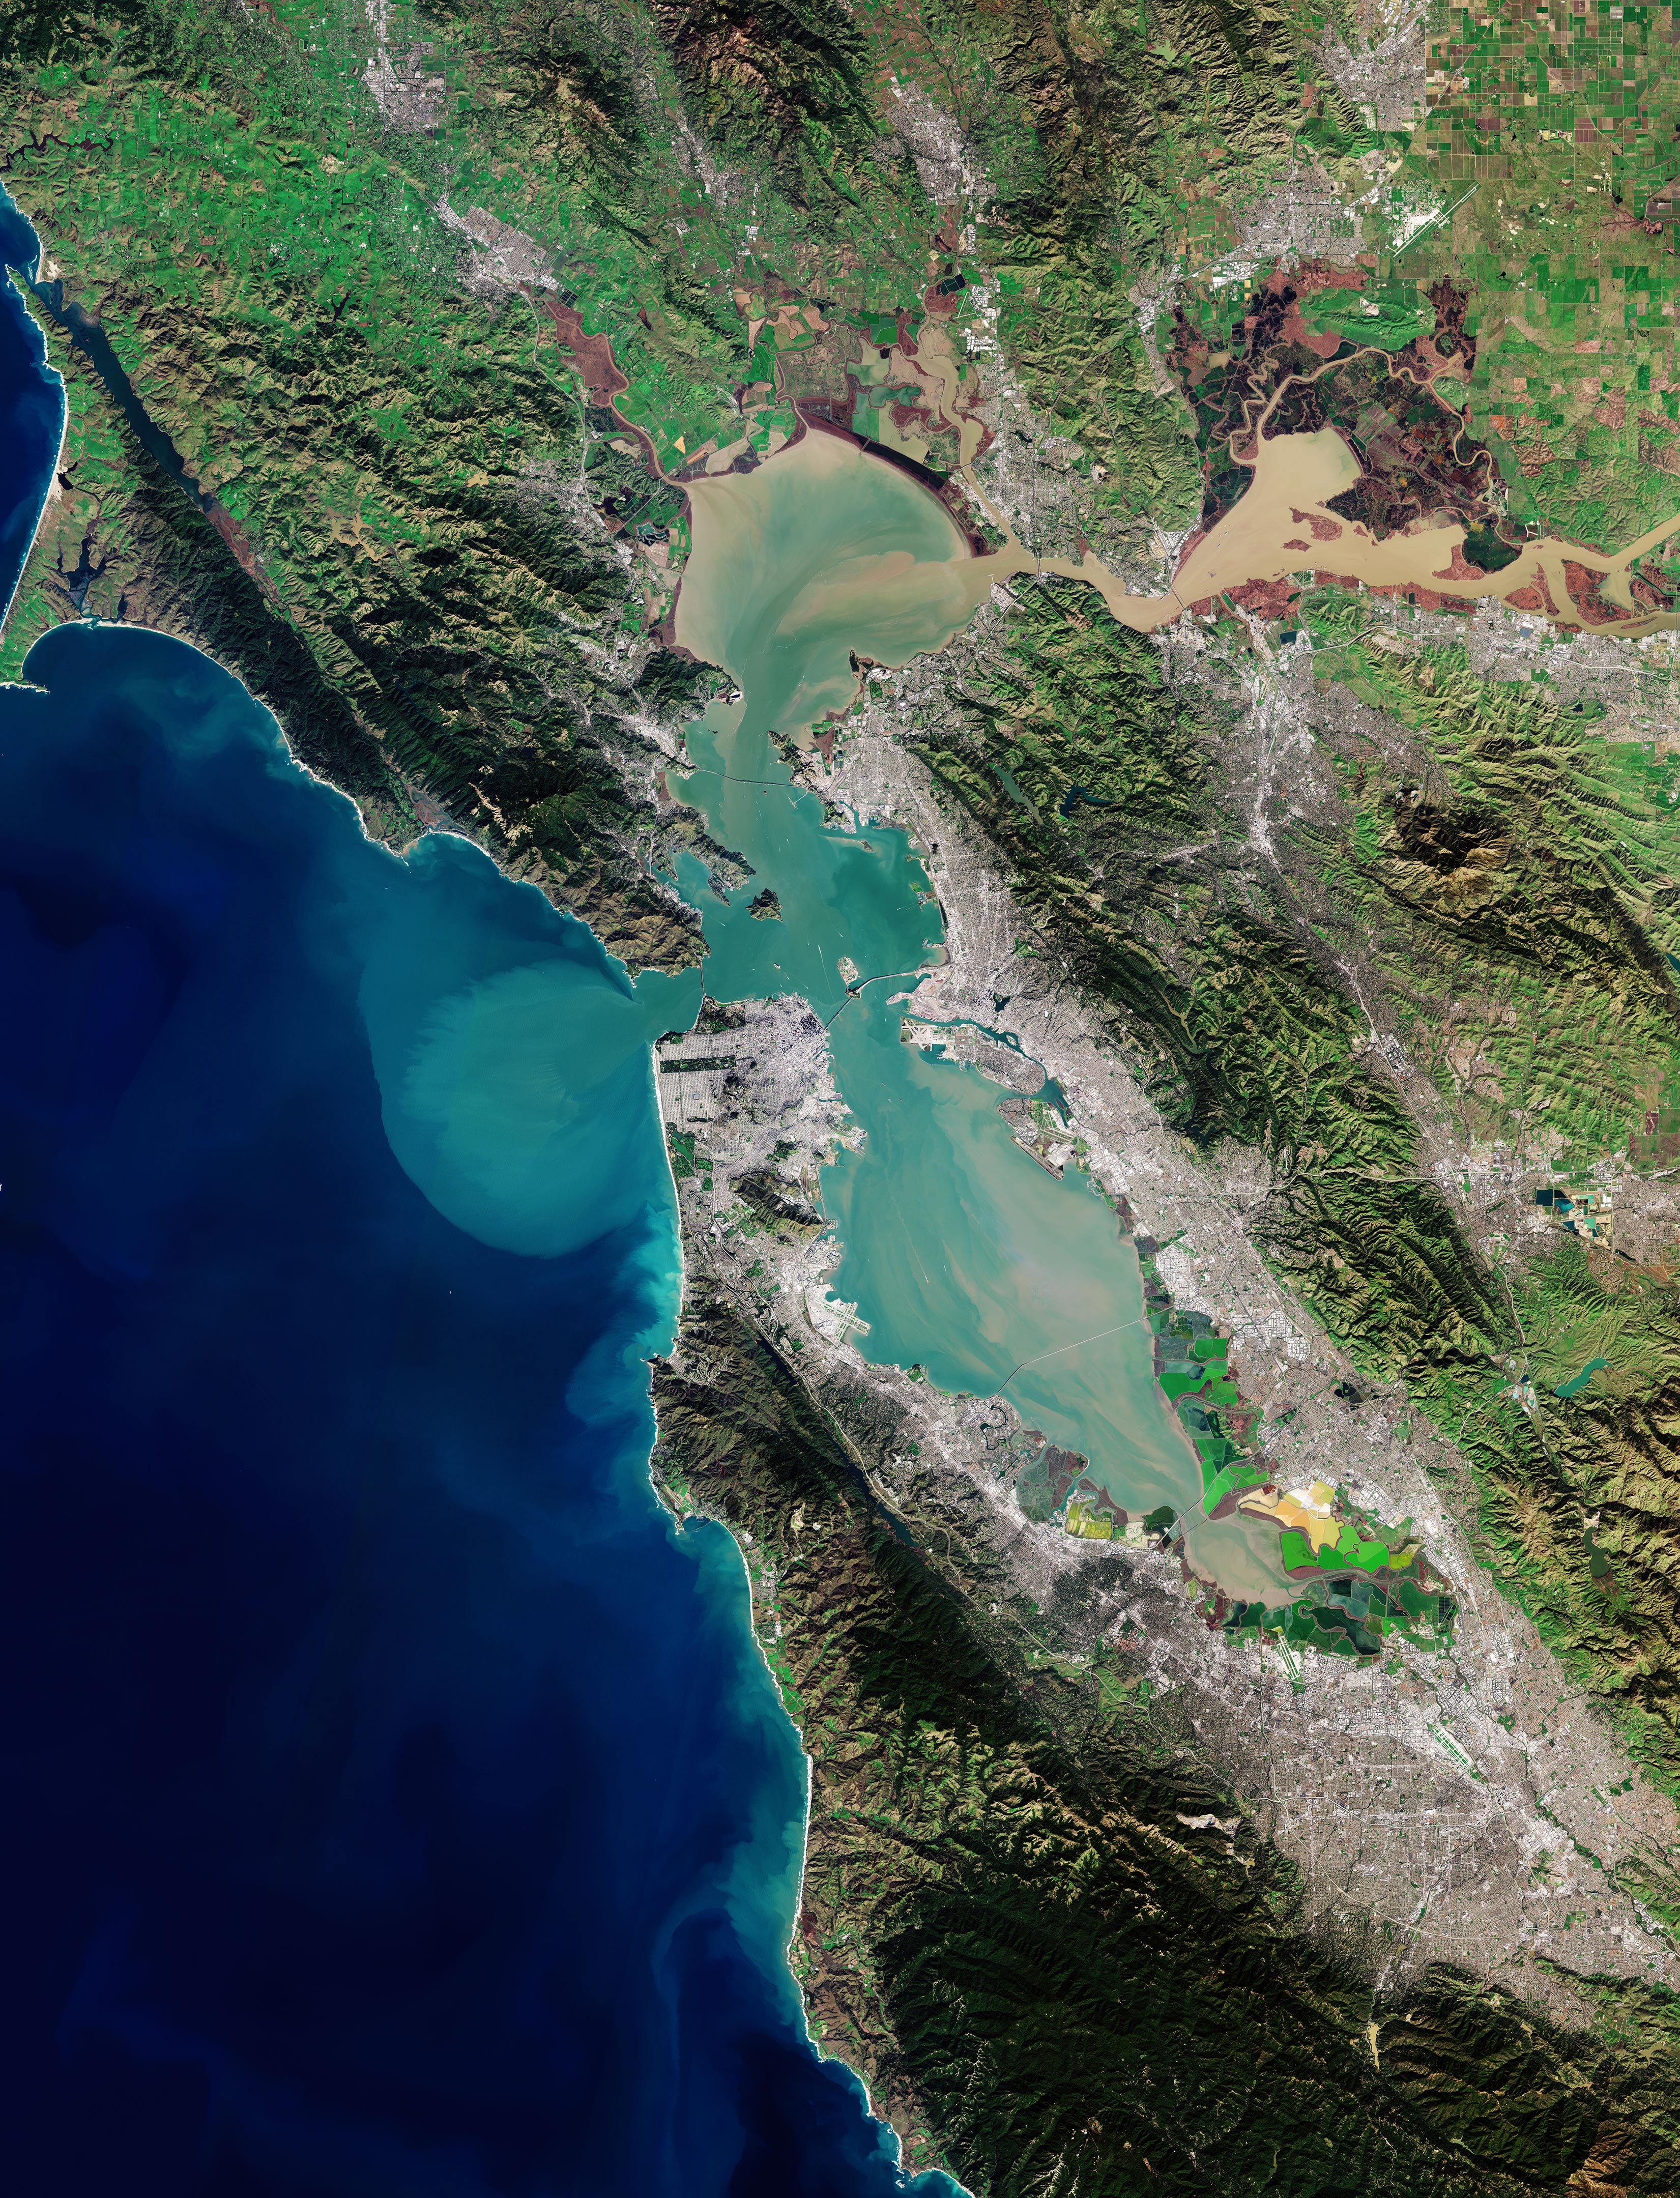 [TMP] "Satellite Captures Incredible Detailed View of San Francisco" Topic